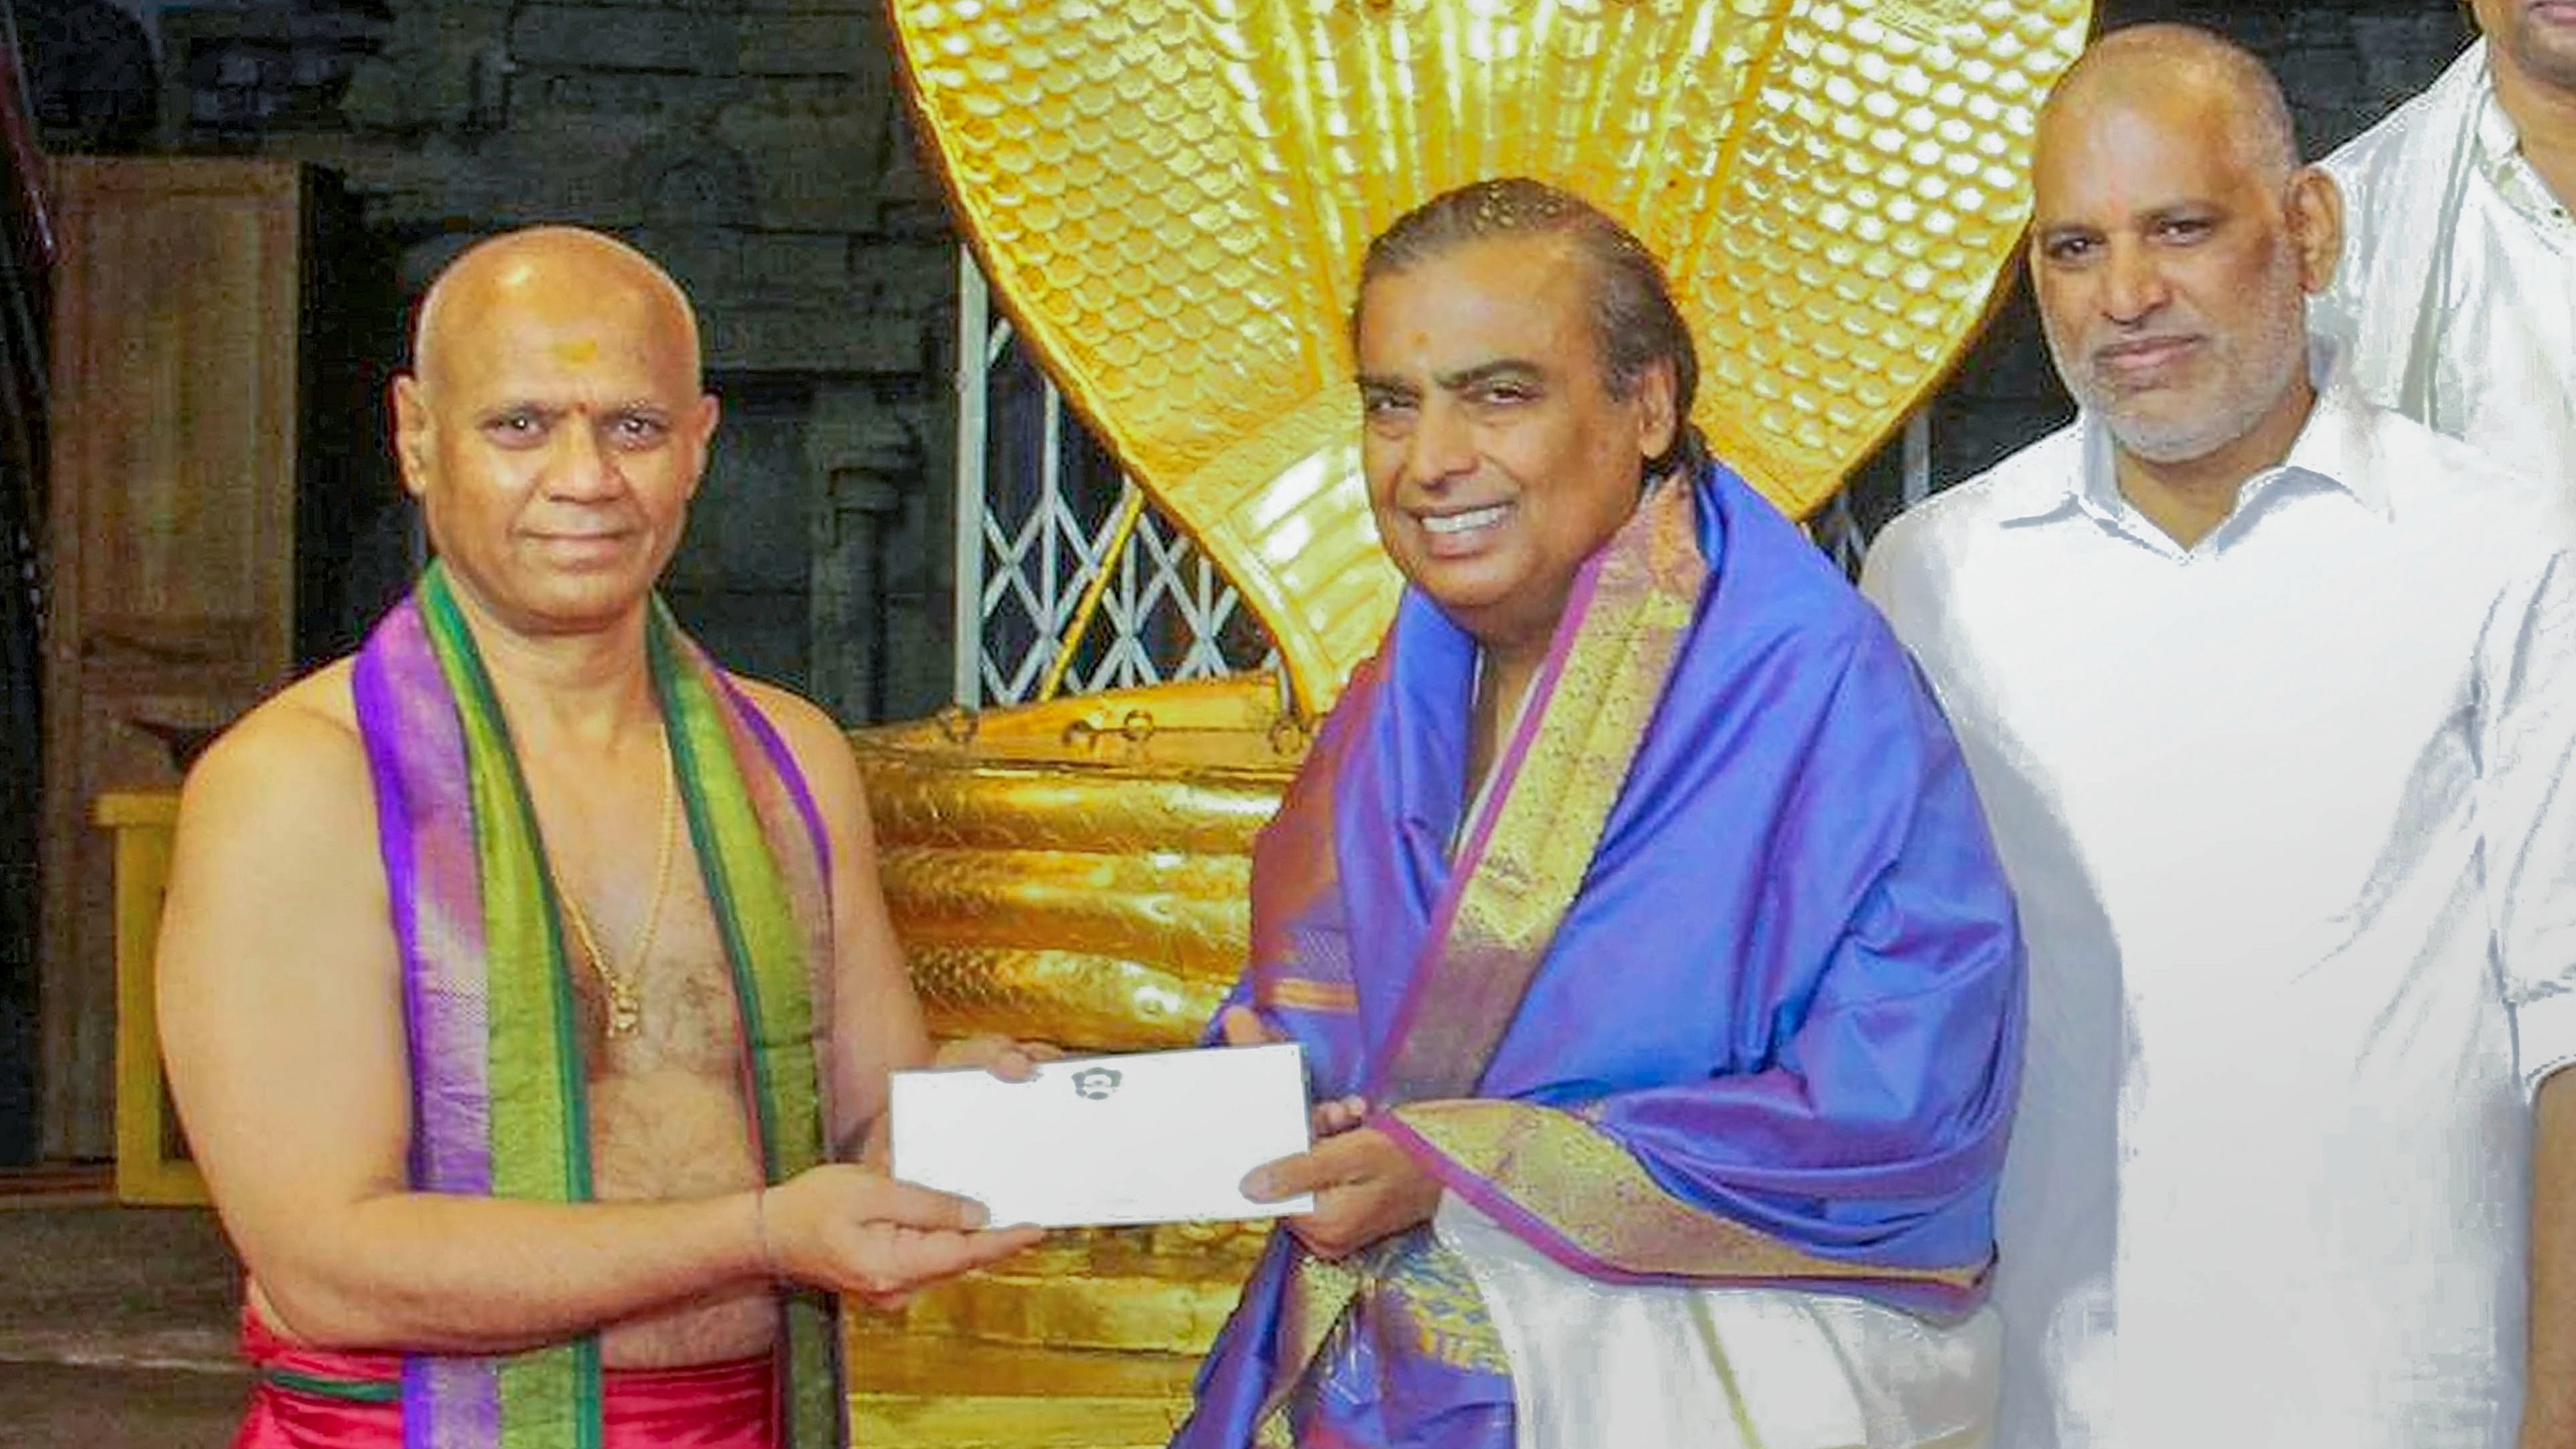 Mukesh Ambani hands over a cheque for Rs 1.5 crore to TTD Additional Executive Officer. Credit: PTI Photo